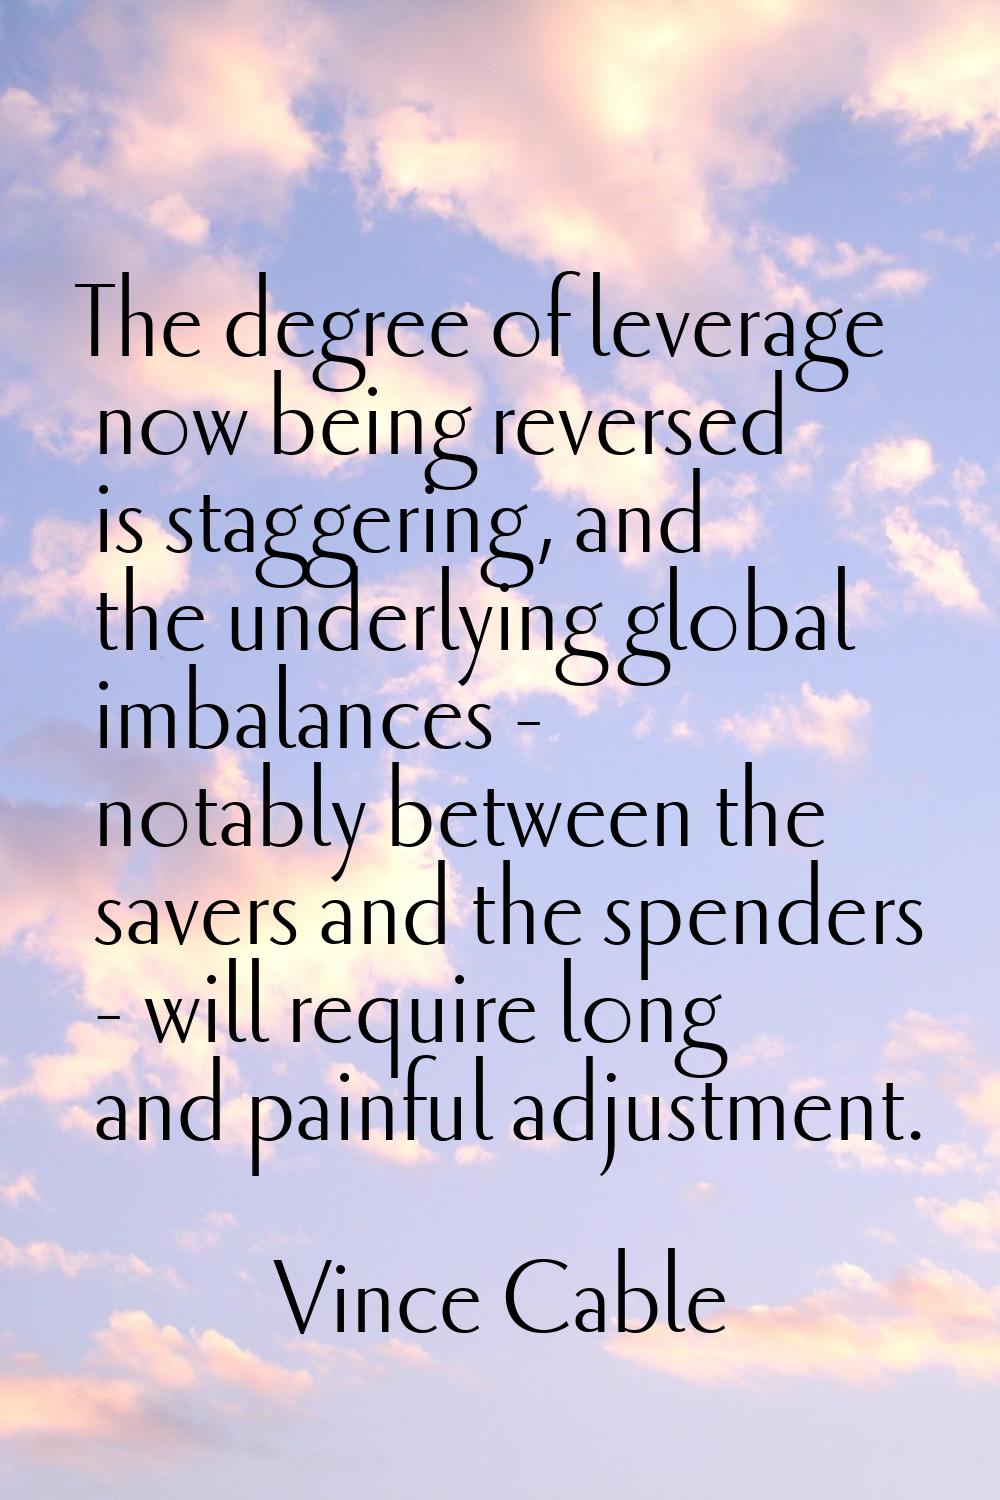 The degree of leverage now being reversed is staggering, and the underlying global imbalances - not